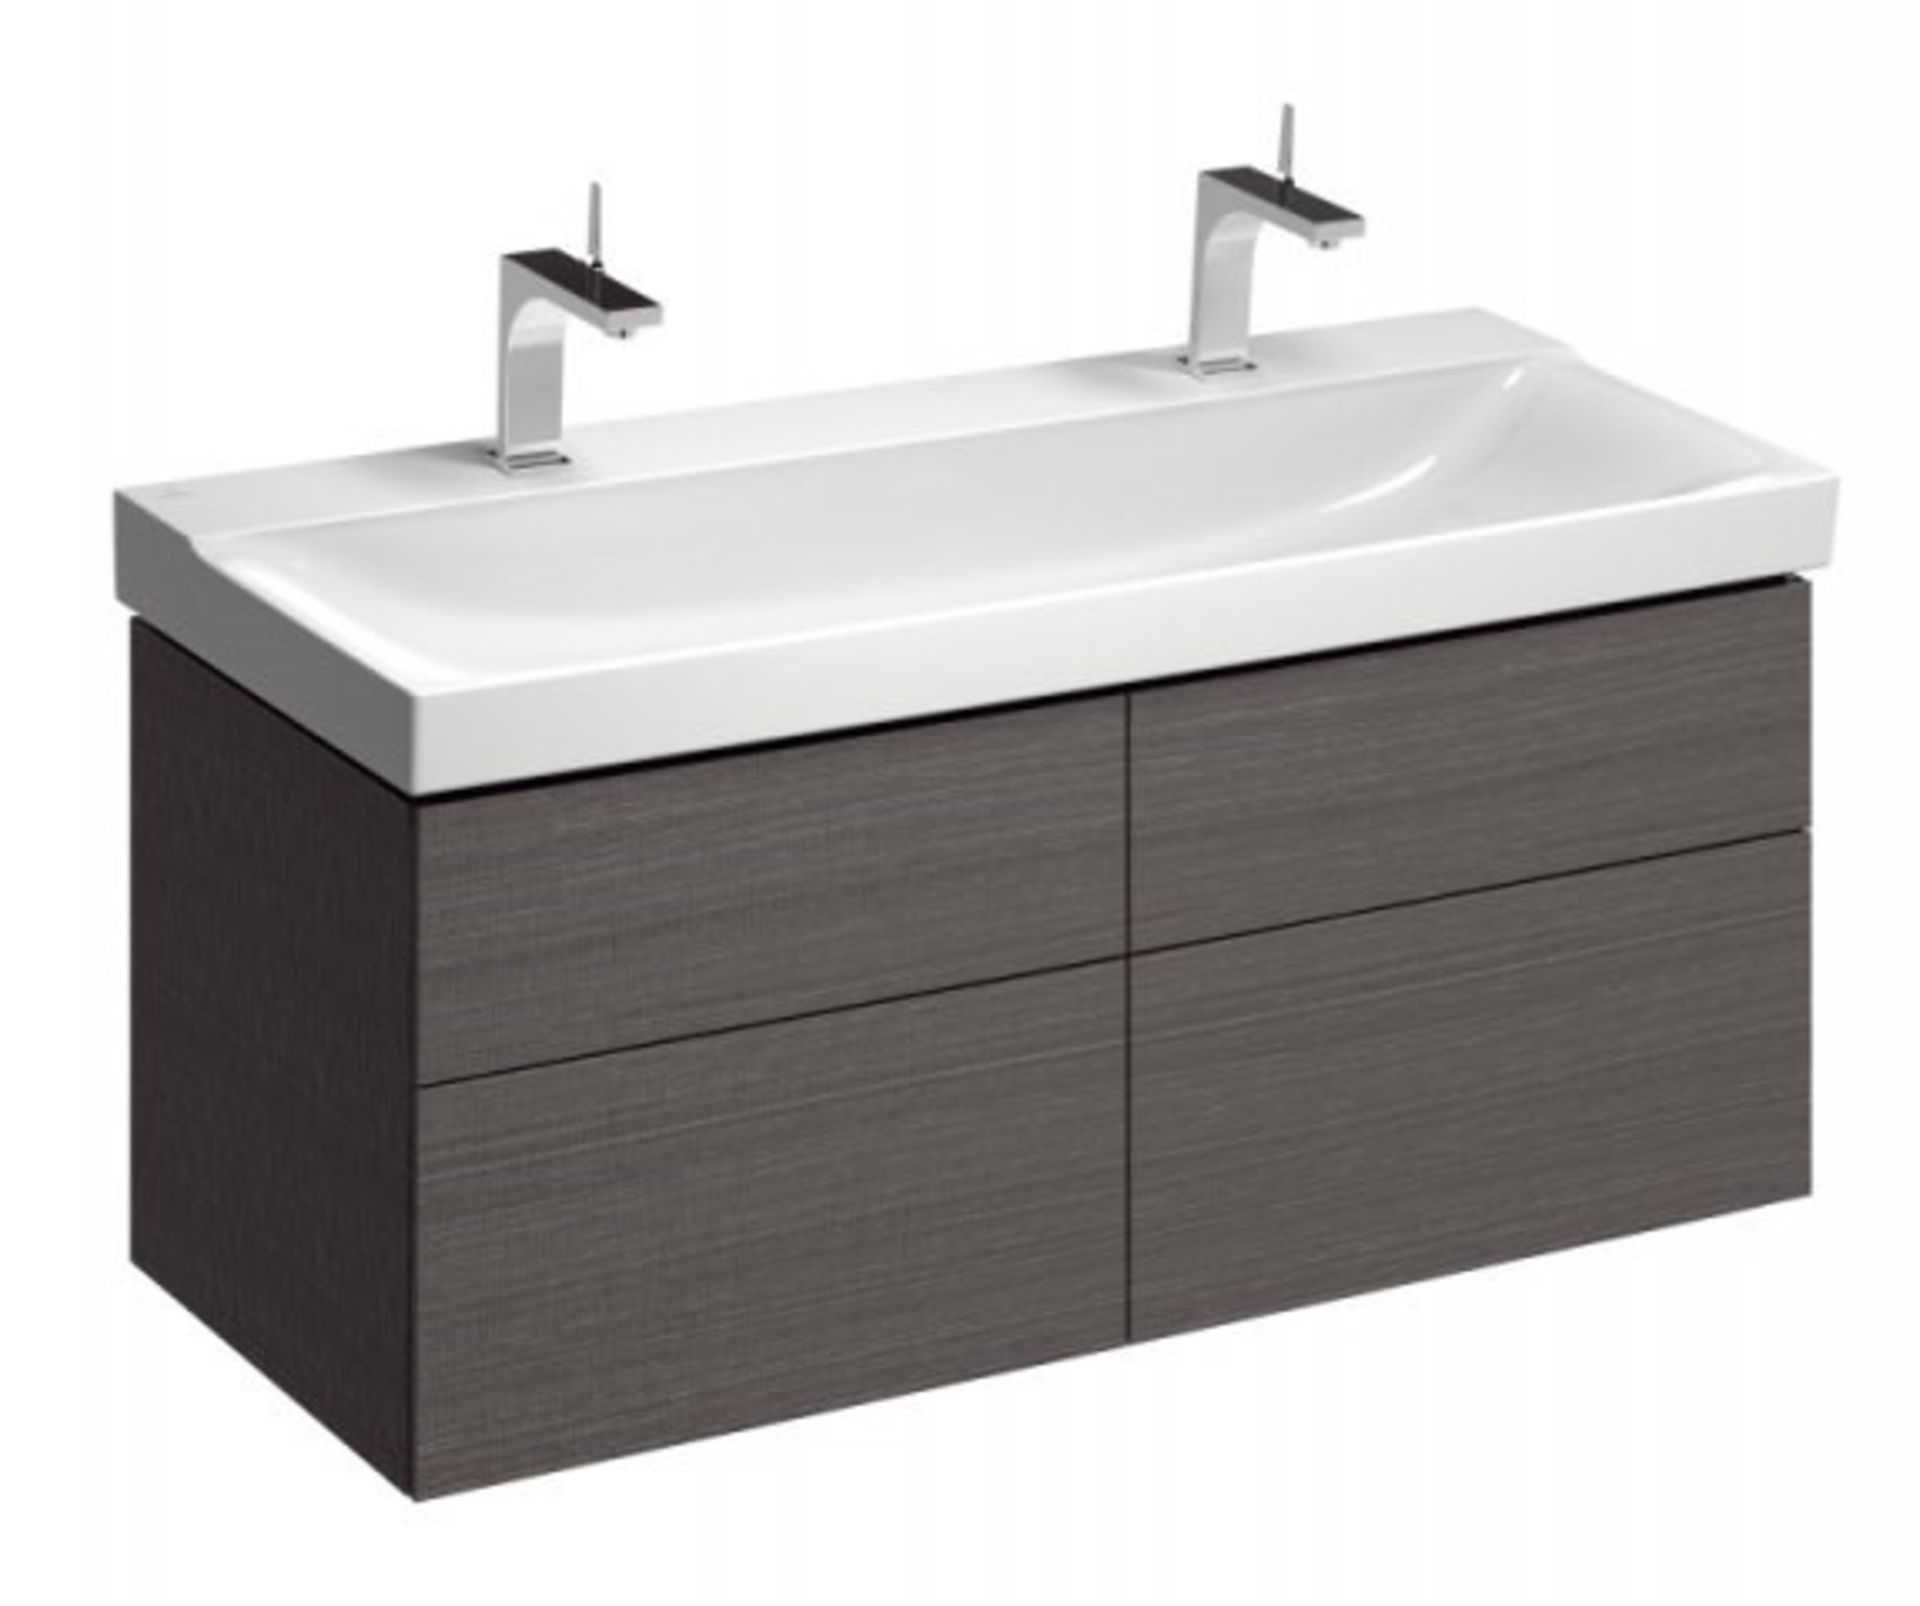 (LV2) Keramag 1174mm Xeno2 Vanity unit. RRP £1680.99.Comes complete with basin. A premium ba... - Image 2 of 2